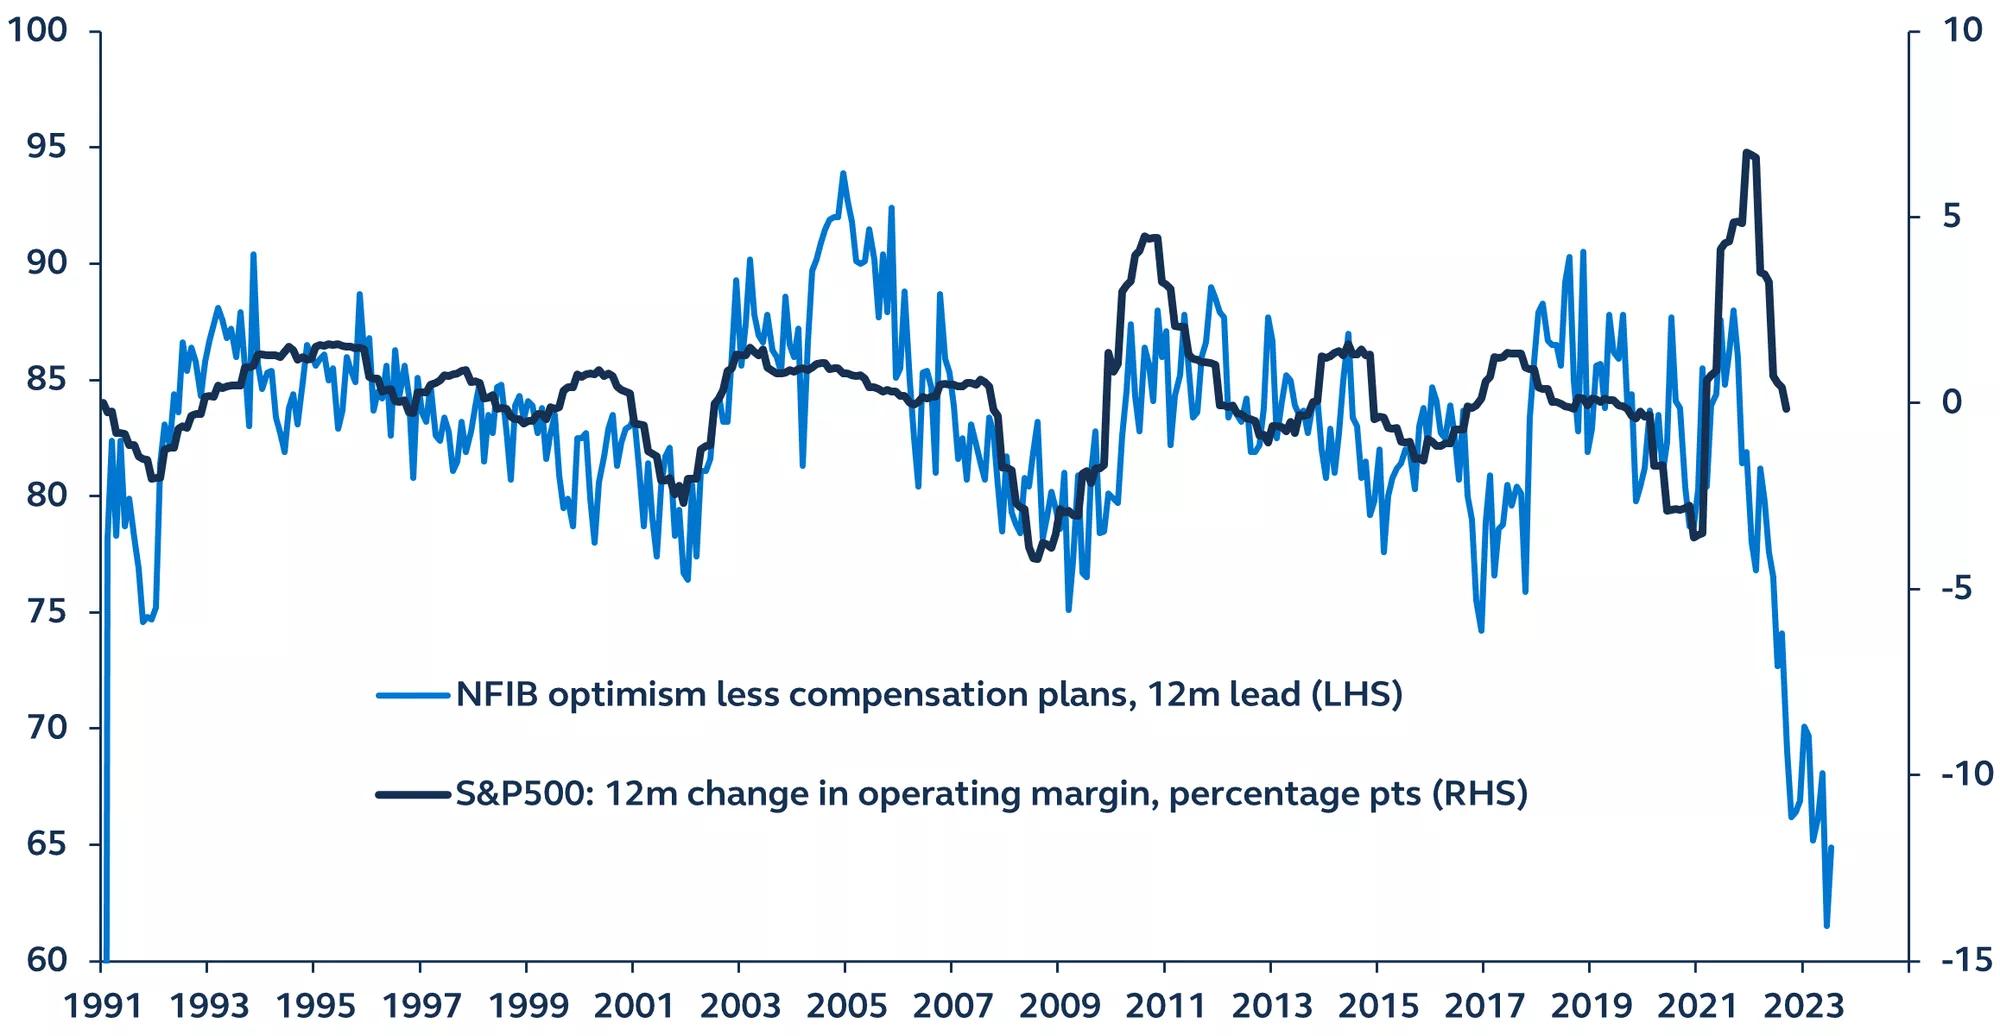 Line graph of small business optimism and operating margin from 1991-2022